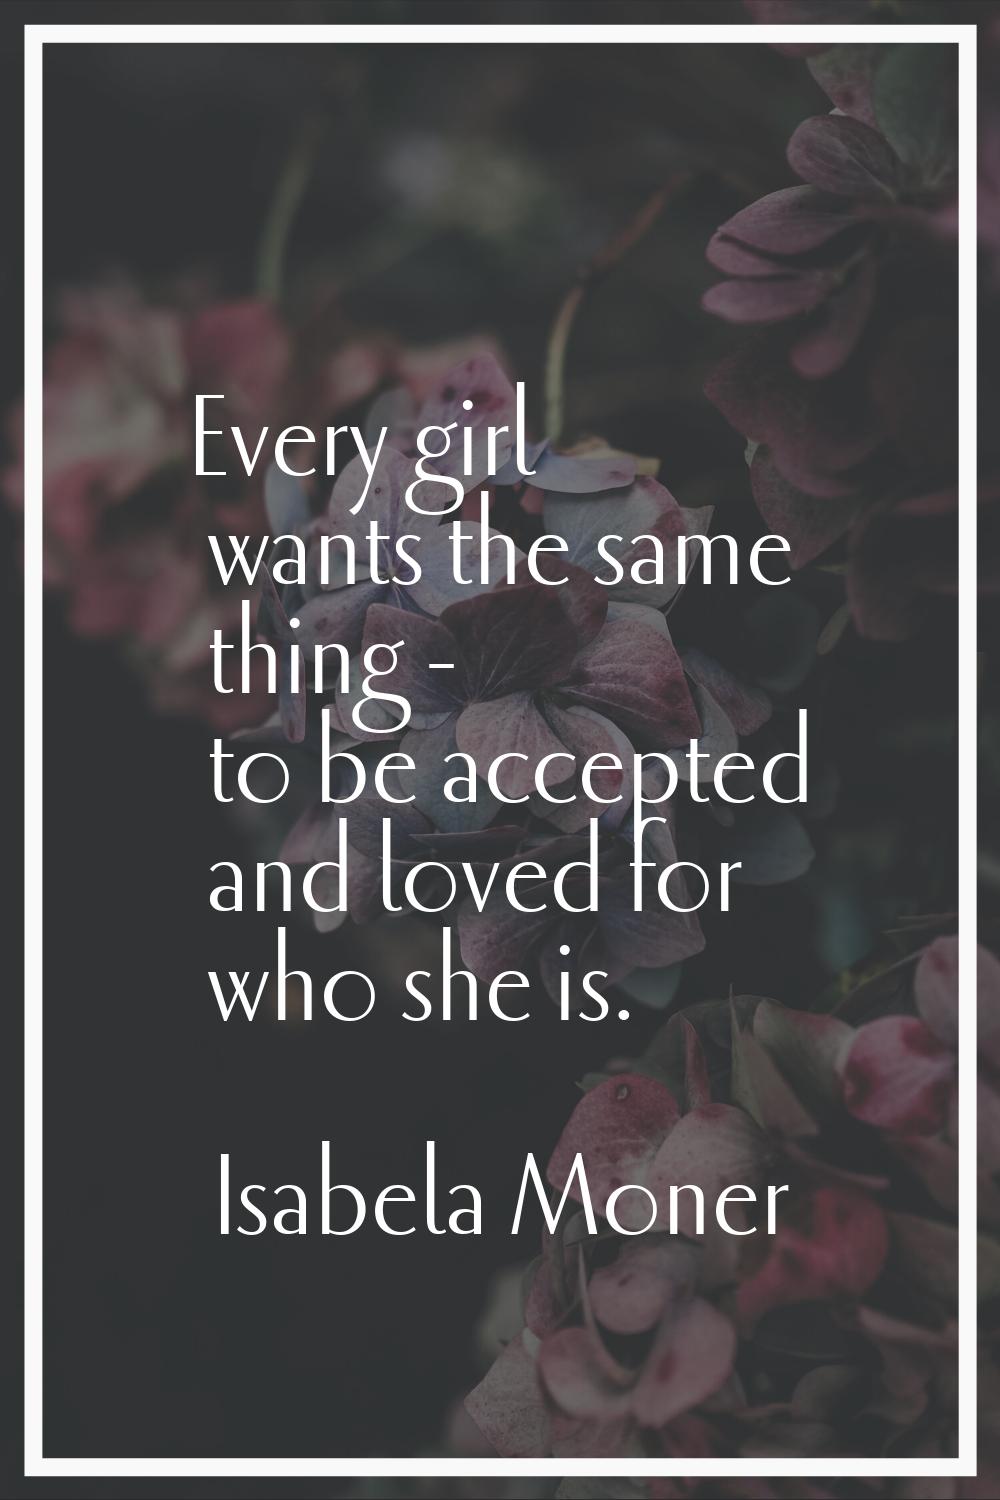 Every girl wants the same thing - to be accepted and loved for who she is.